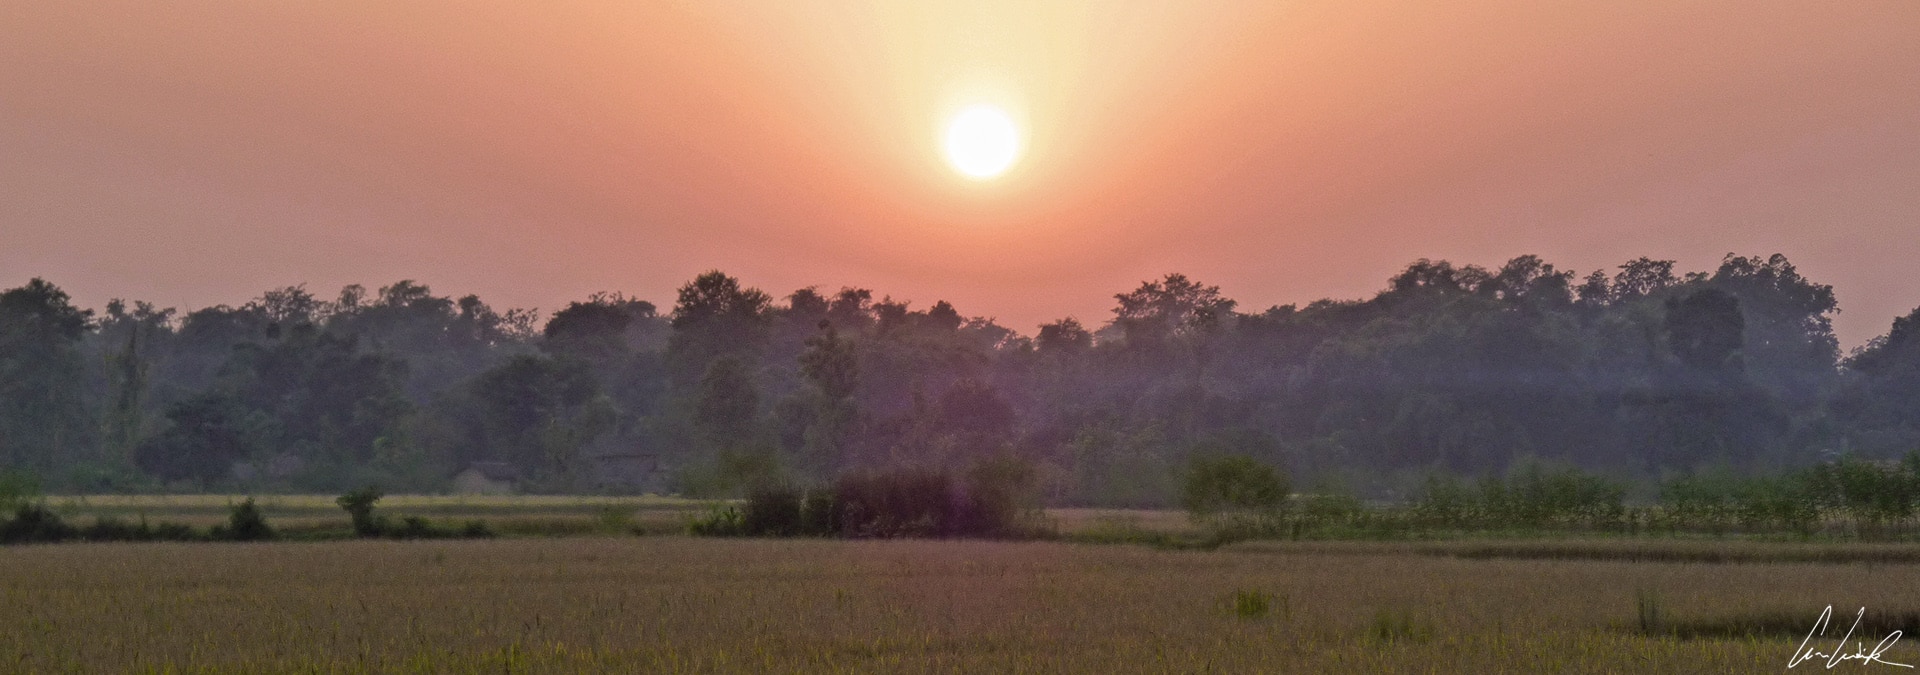 In Nepal, the Bardia National Park is the off-the-beaten-track. You can enjoy the nature and experience magnificent sunsets.